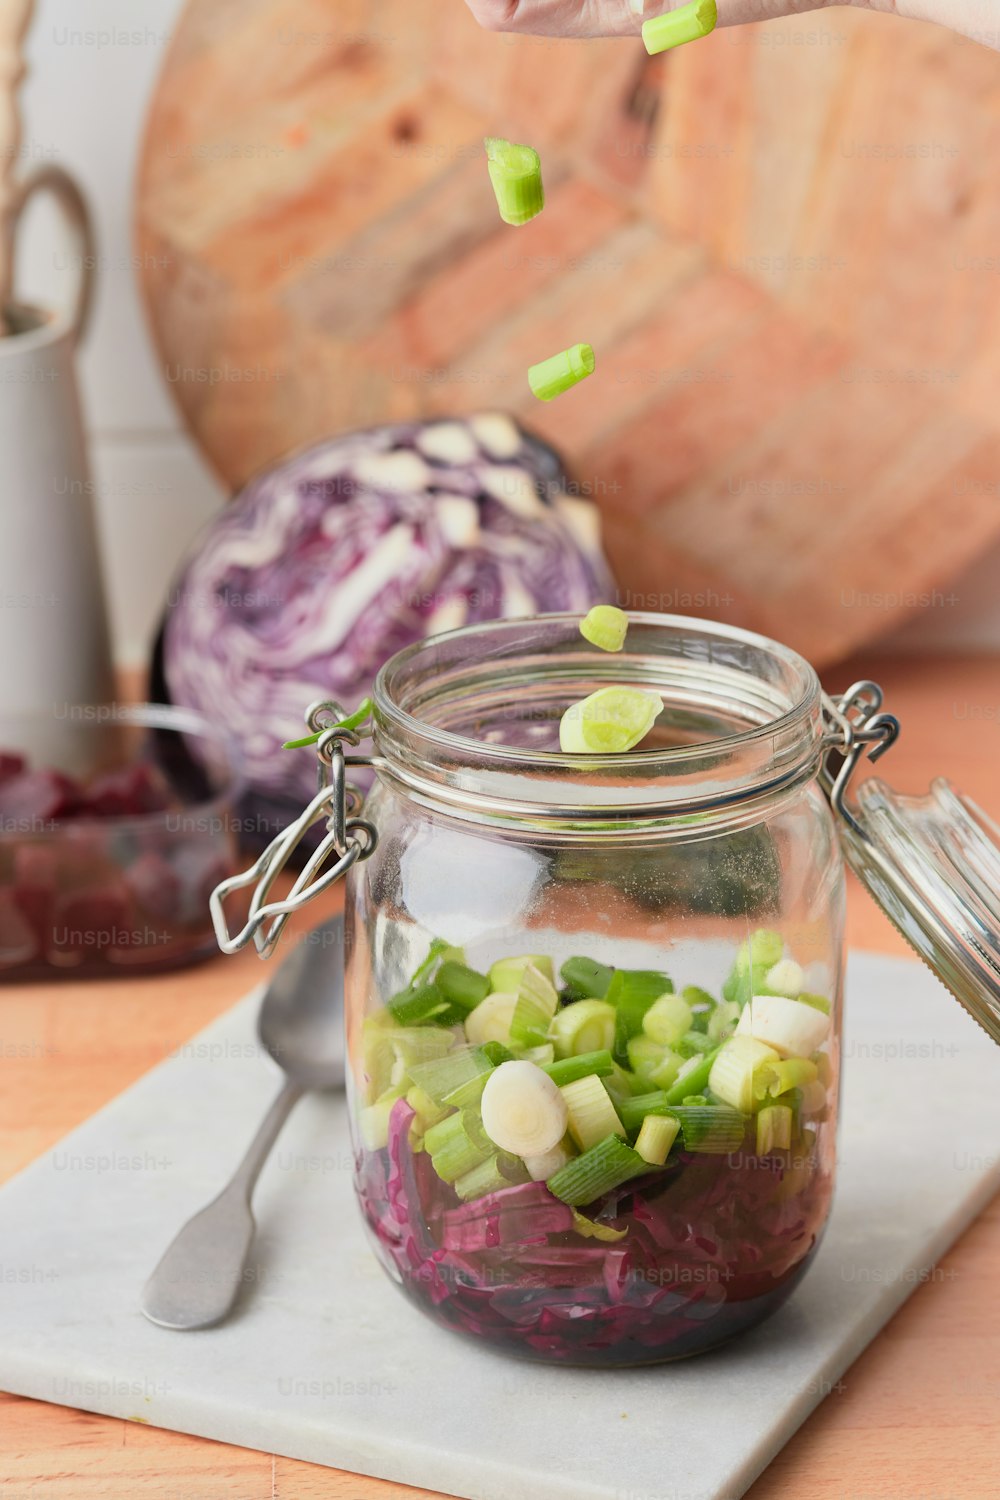 a person is sprinkling chopped vegetables into a jar